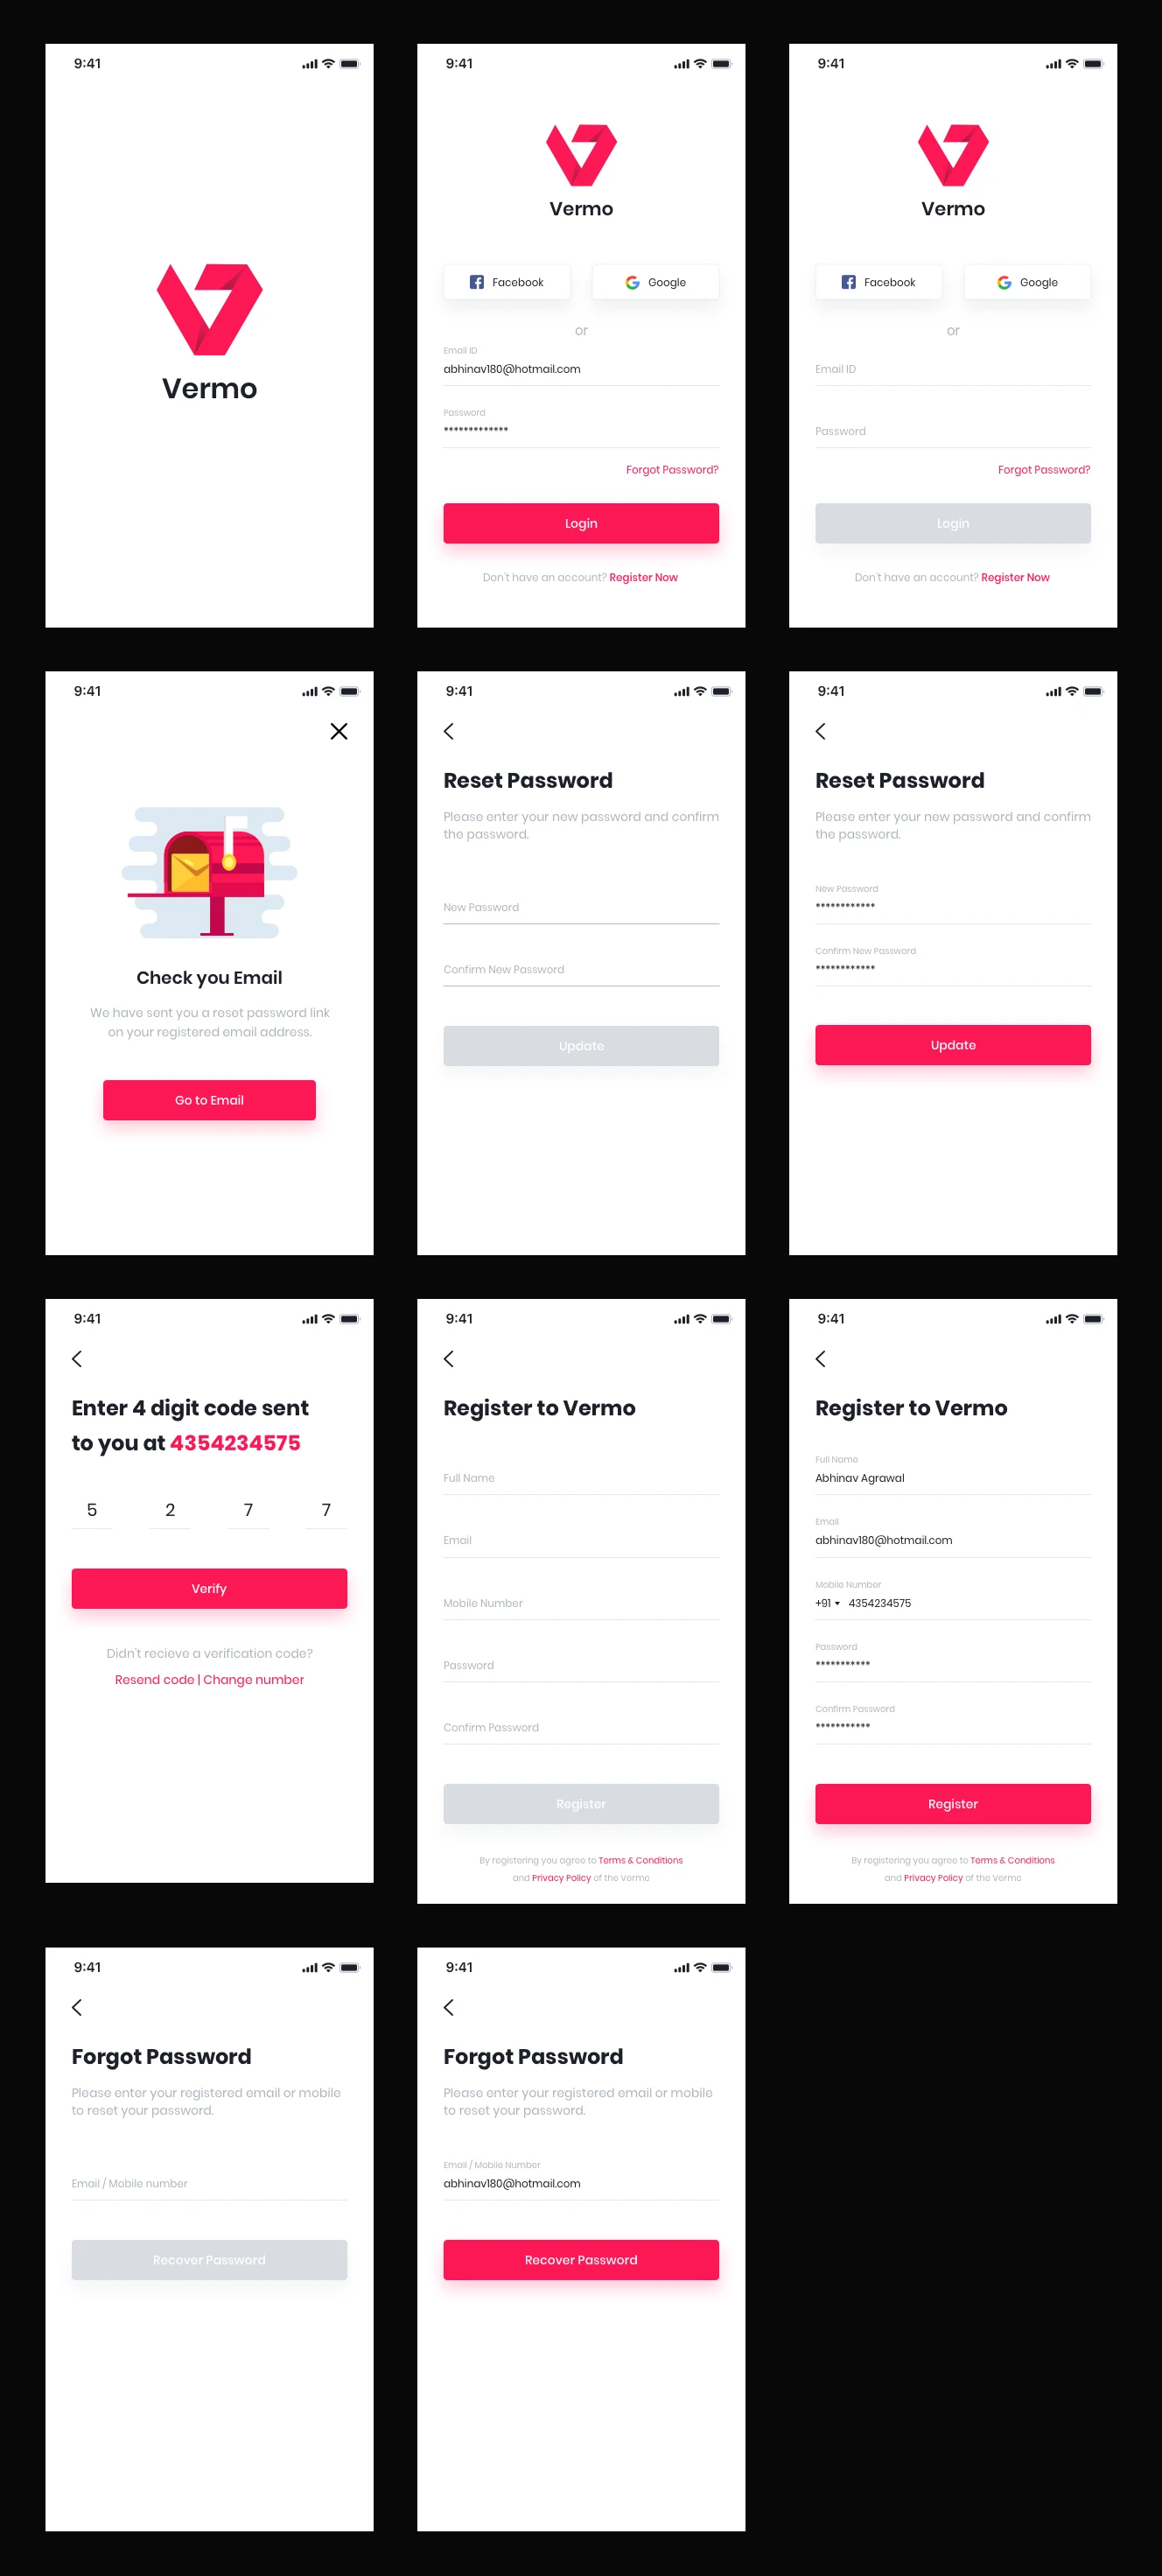 App Login Screens UI Kit - Login Screens UI kit for Sketch to help you quickly design and build login flows. This freebie UI kit is available in both light and dark theme. Includes 20+ screens